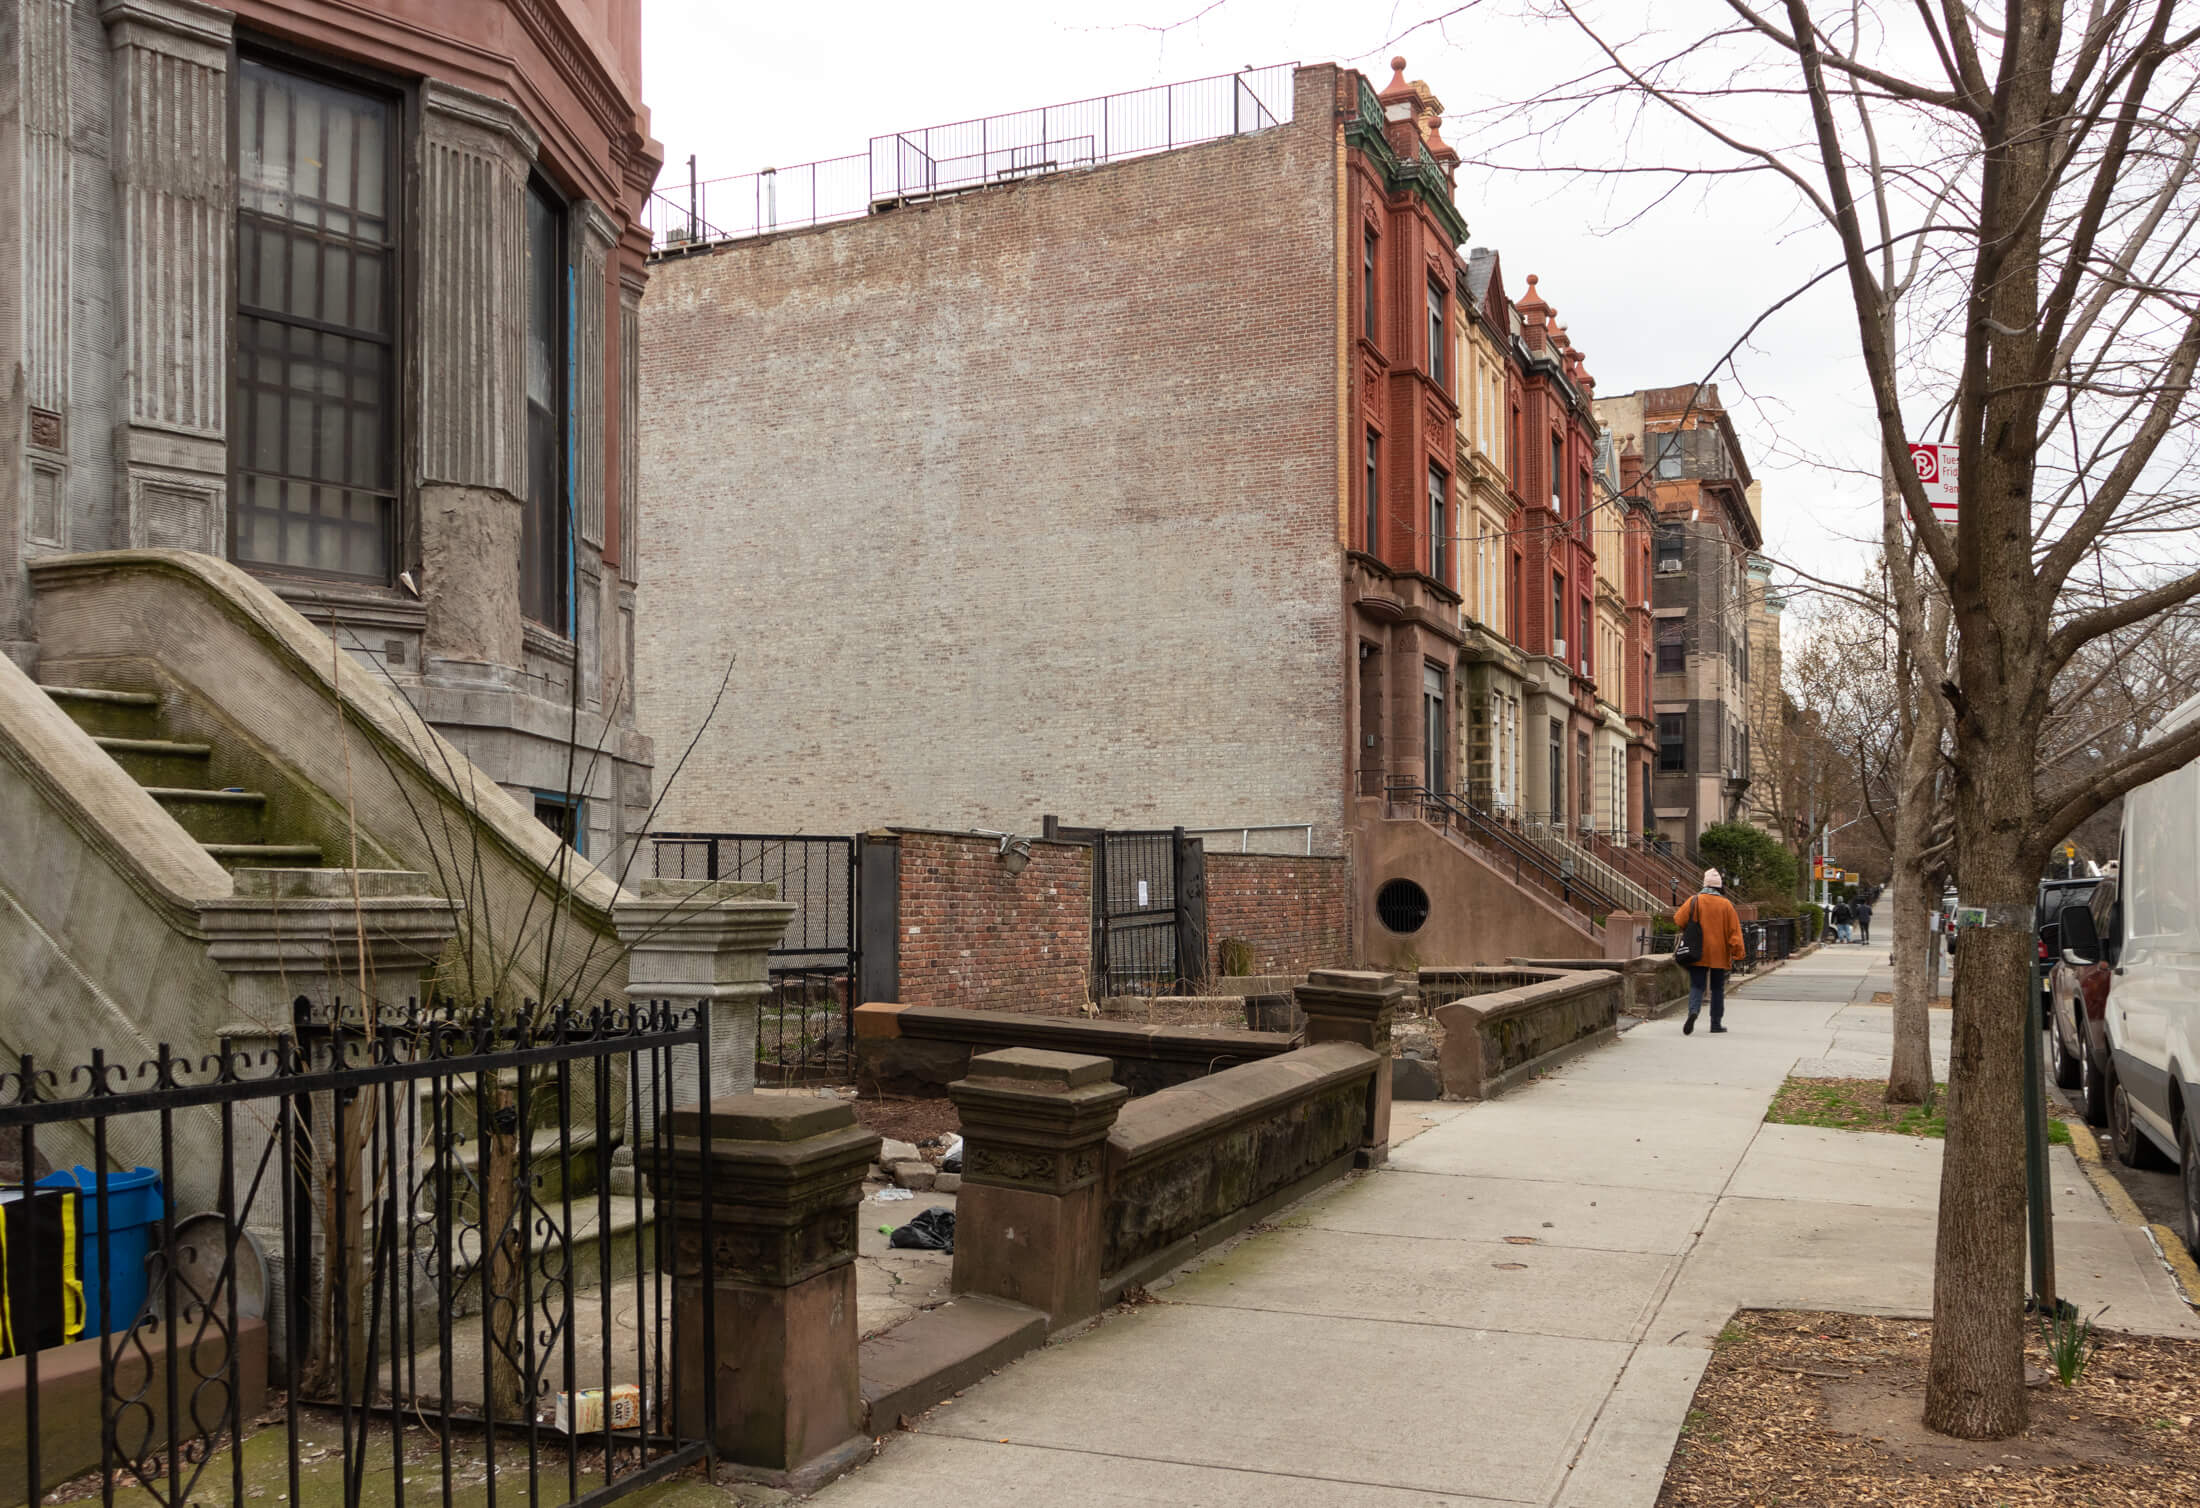 view on hancock street showing vacant lot and adjacent houses